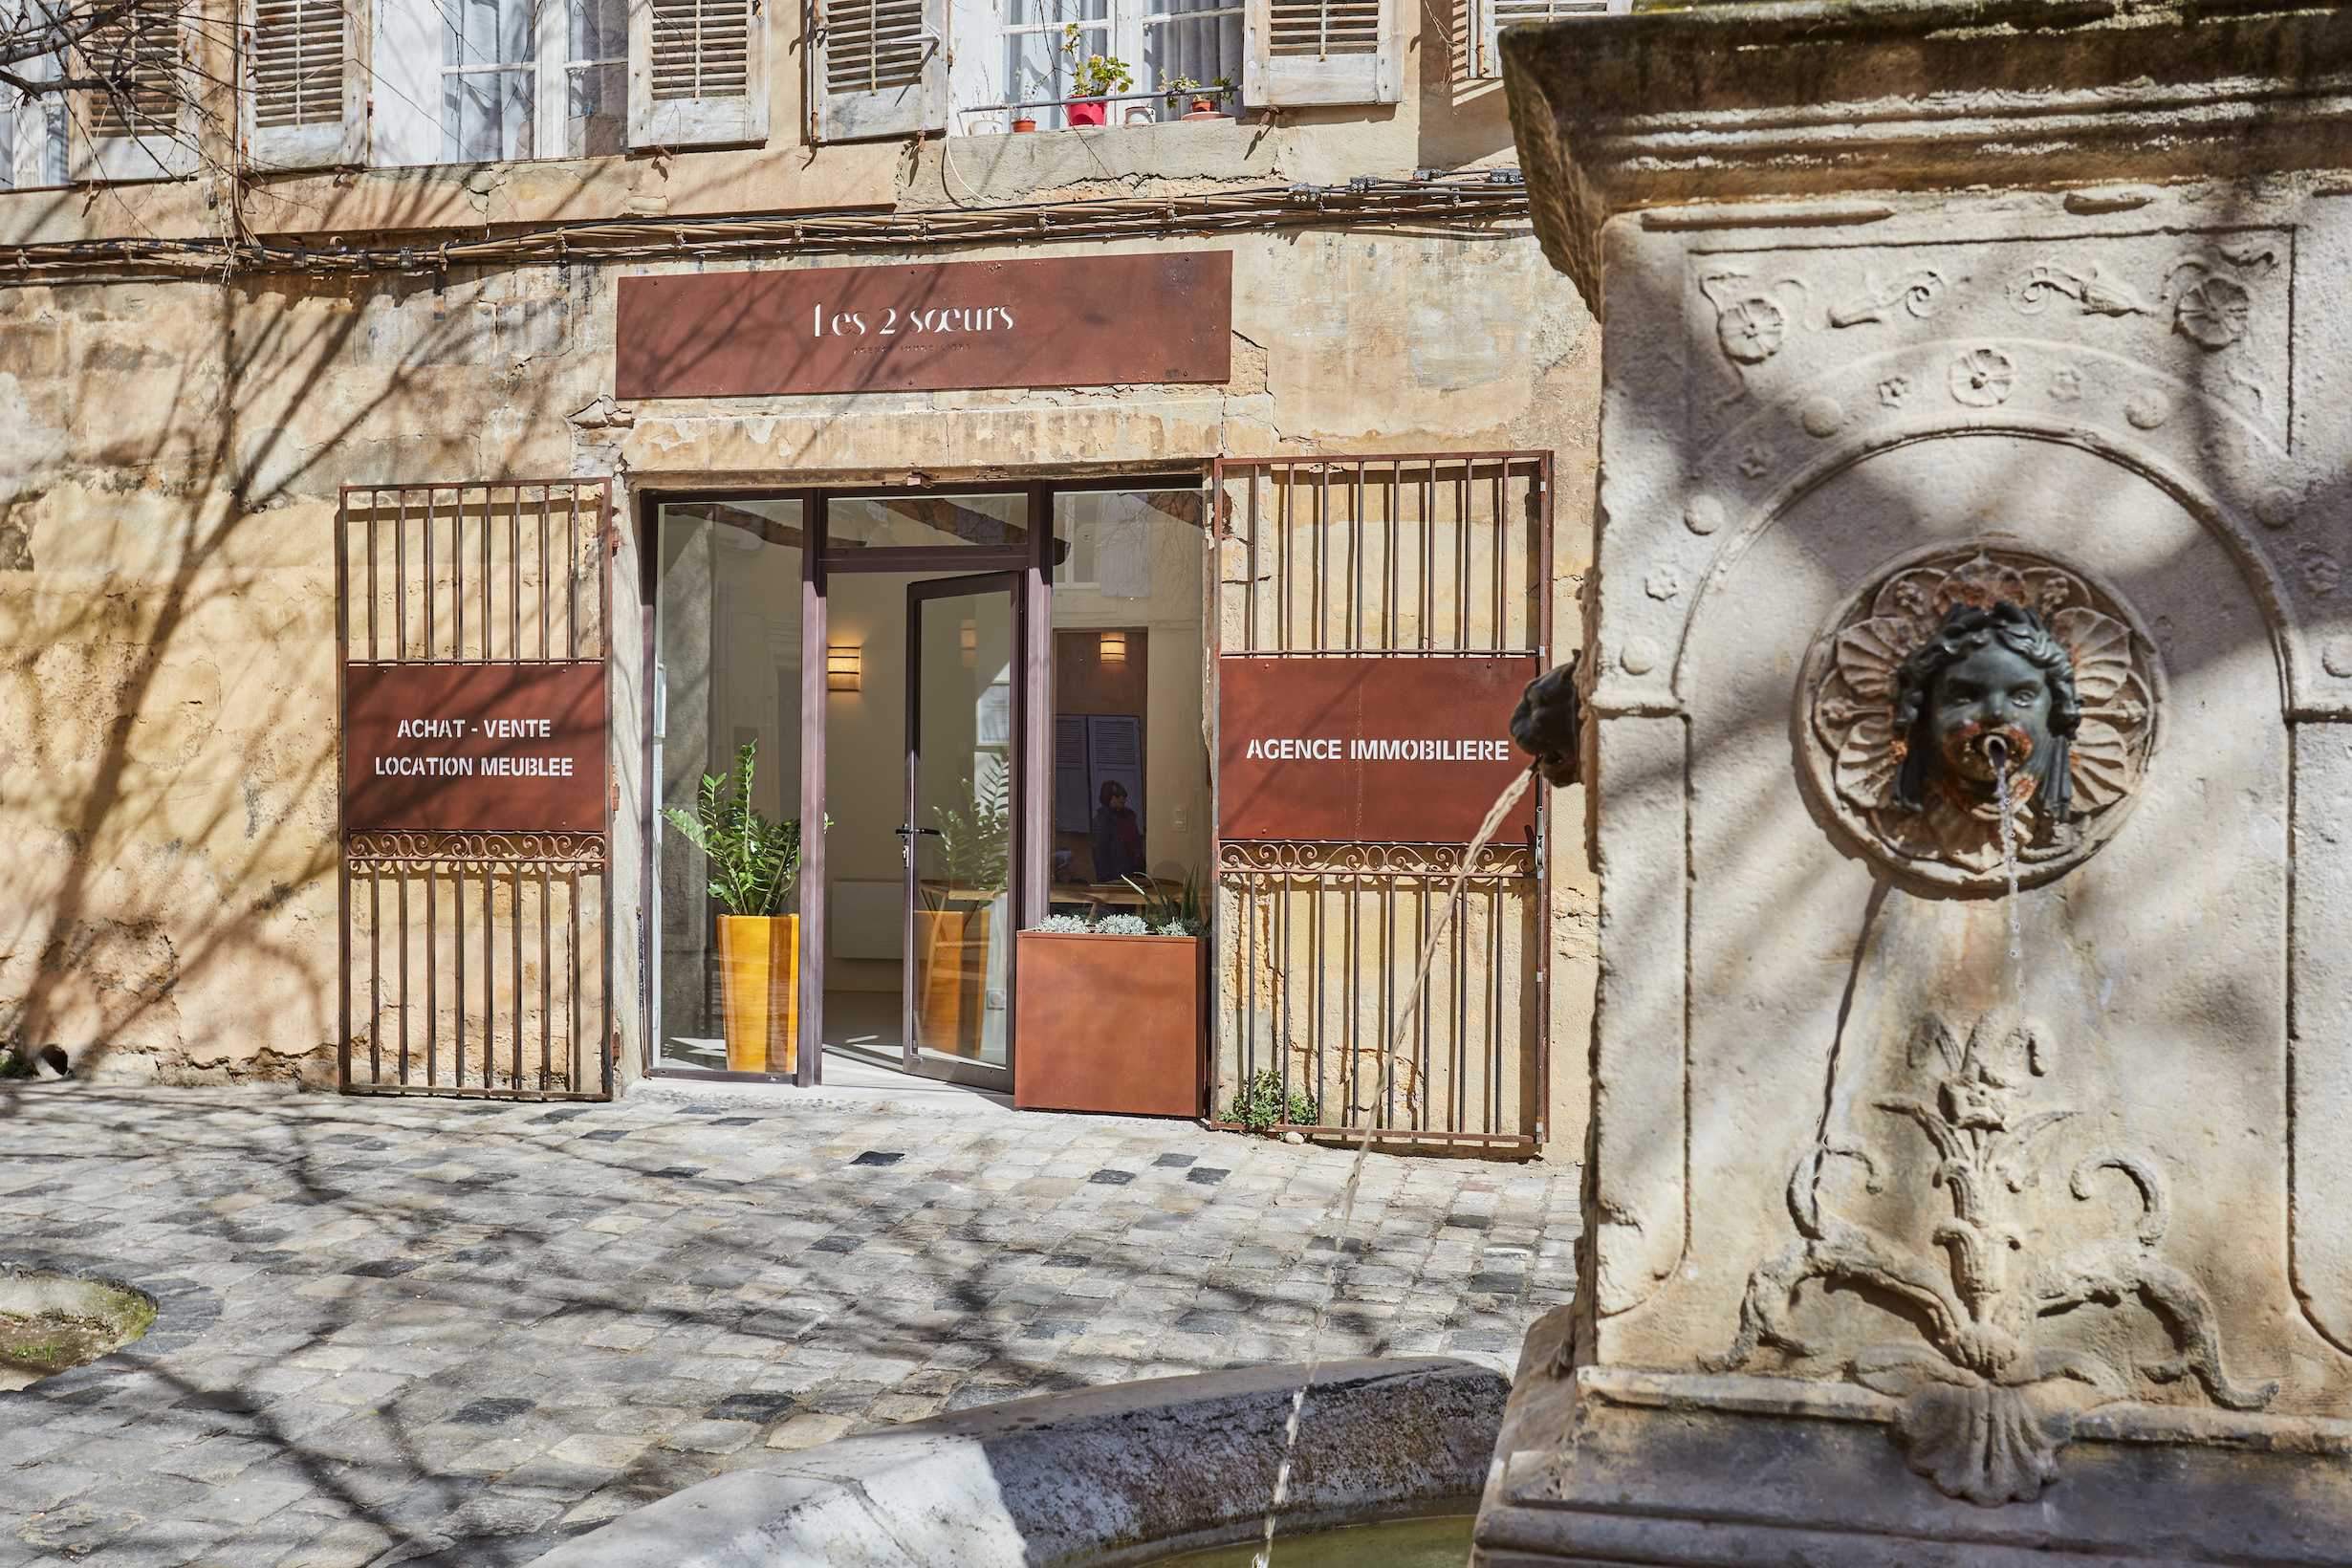 Welcome to Aix-en-Provence (Watch the video)